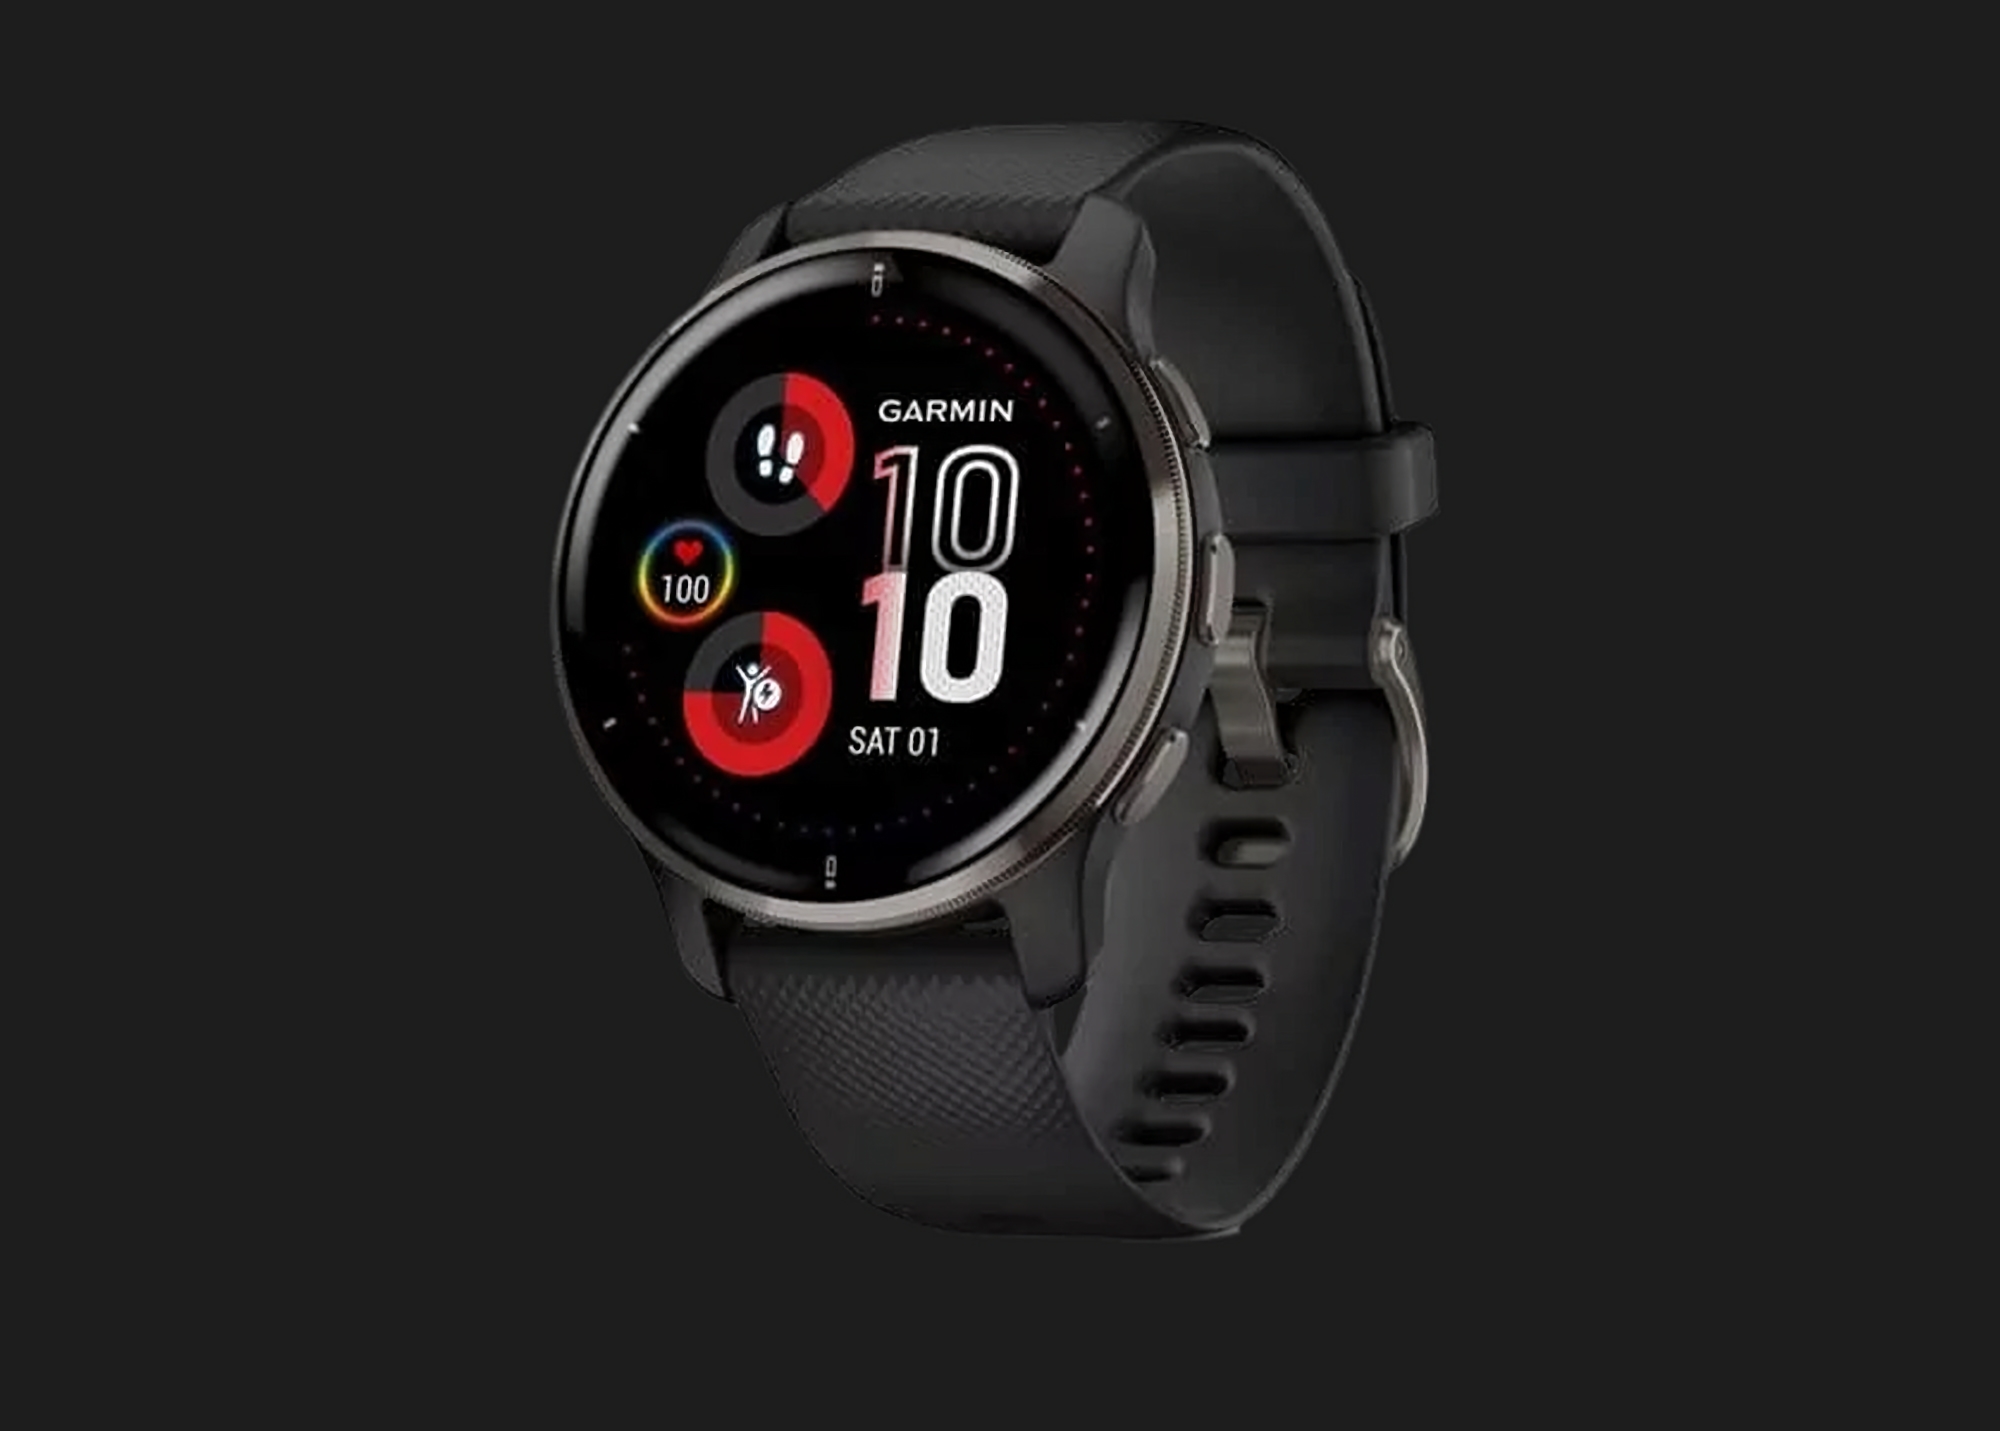 Offer of the day: the Garmin Venu 2 Plus sports smart watch is discounted $120 on Amazon